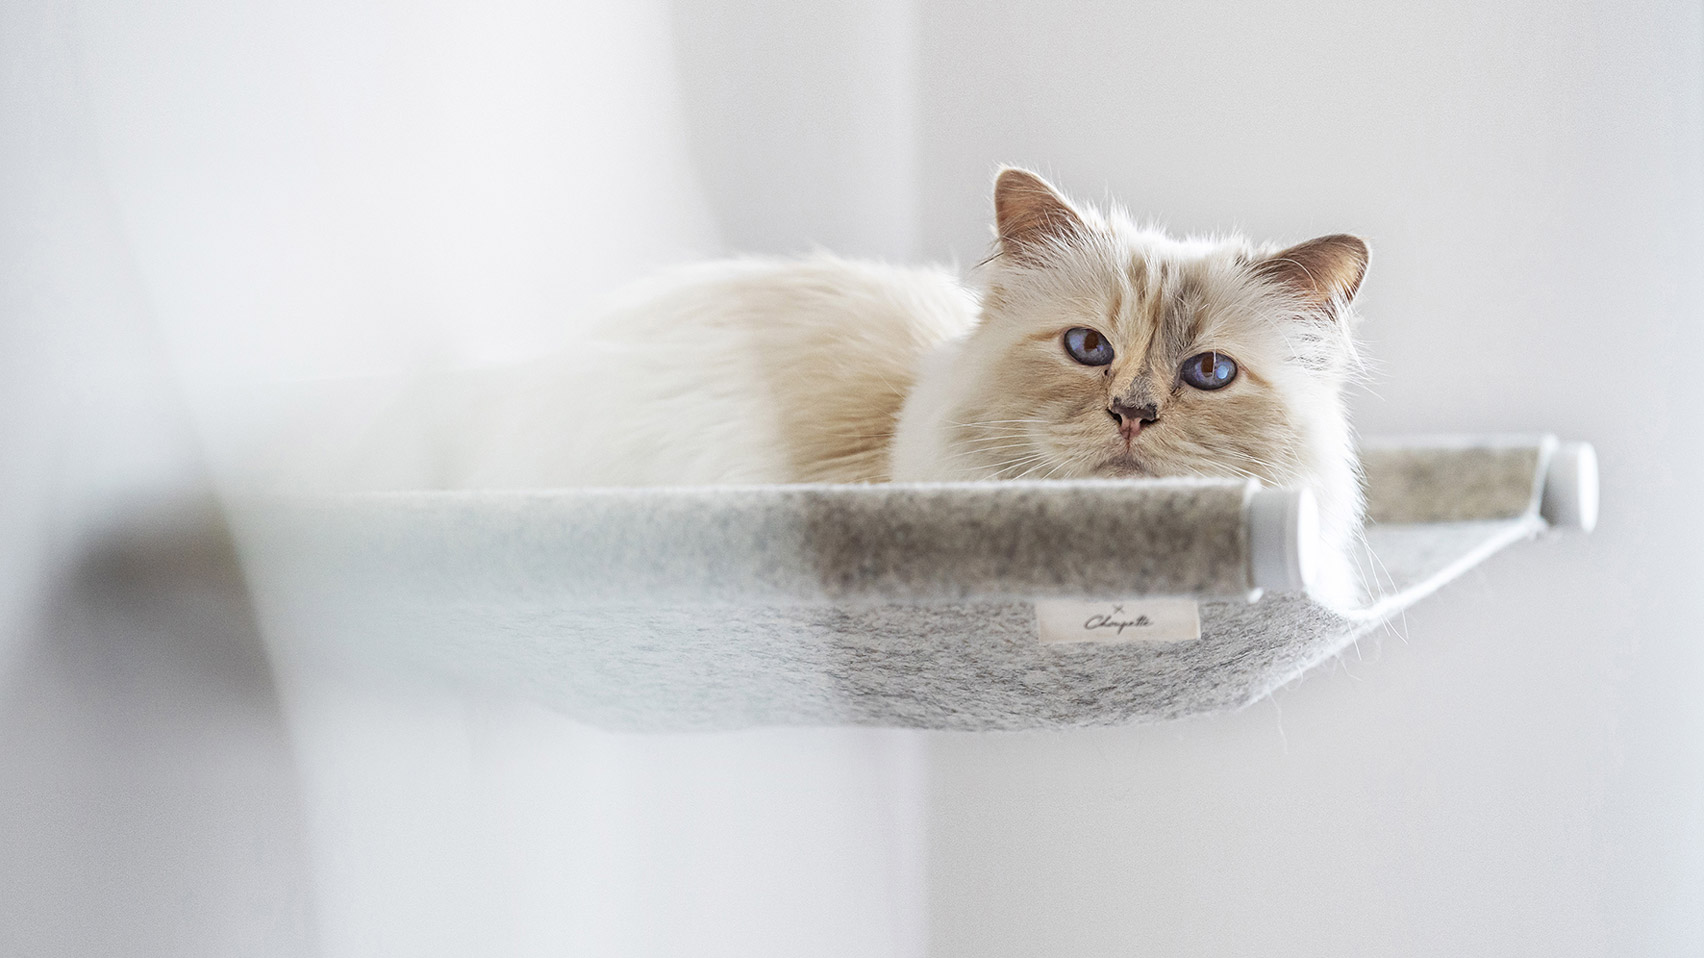 Karl Lagerfeld's pet Choupette collaborates with LucyBalu on Swing cat bed